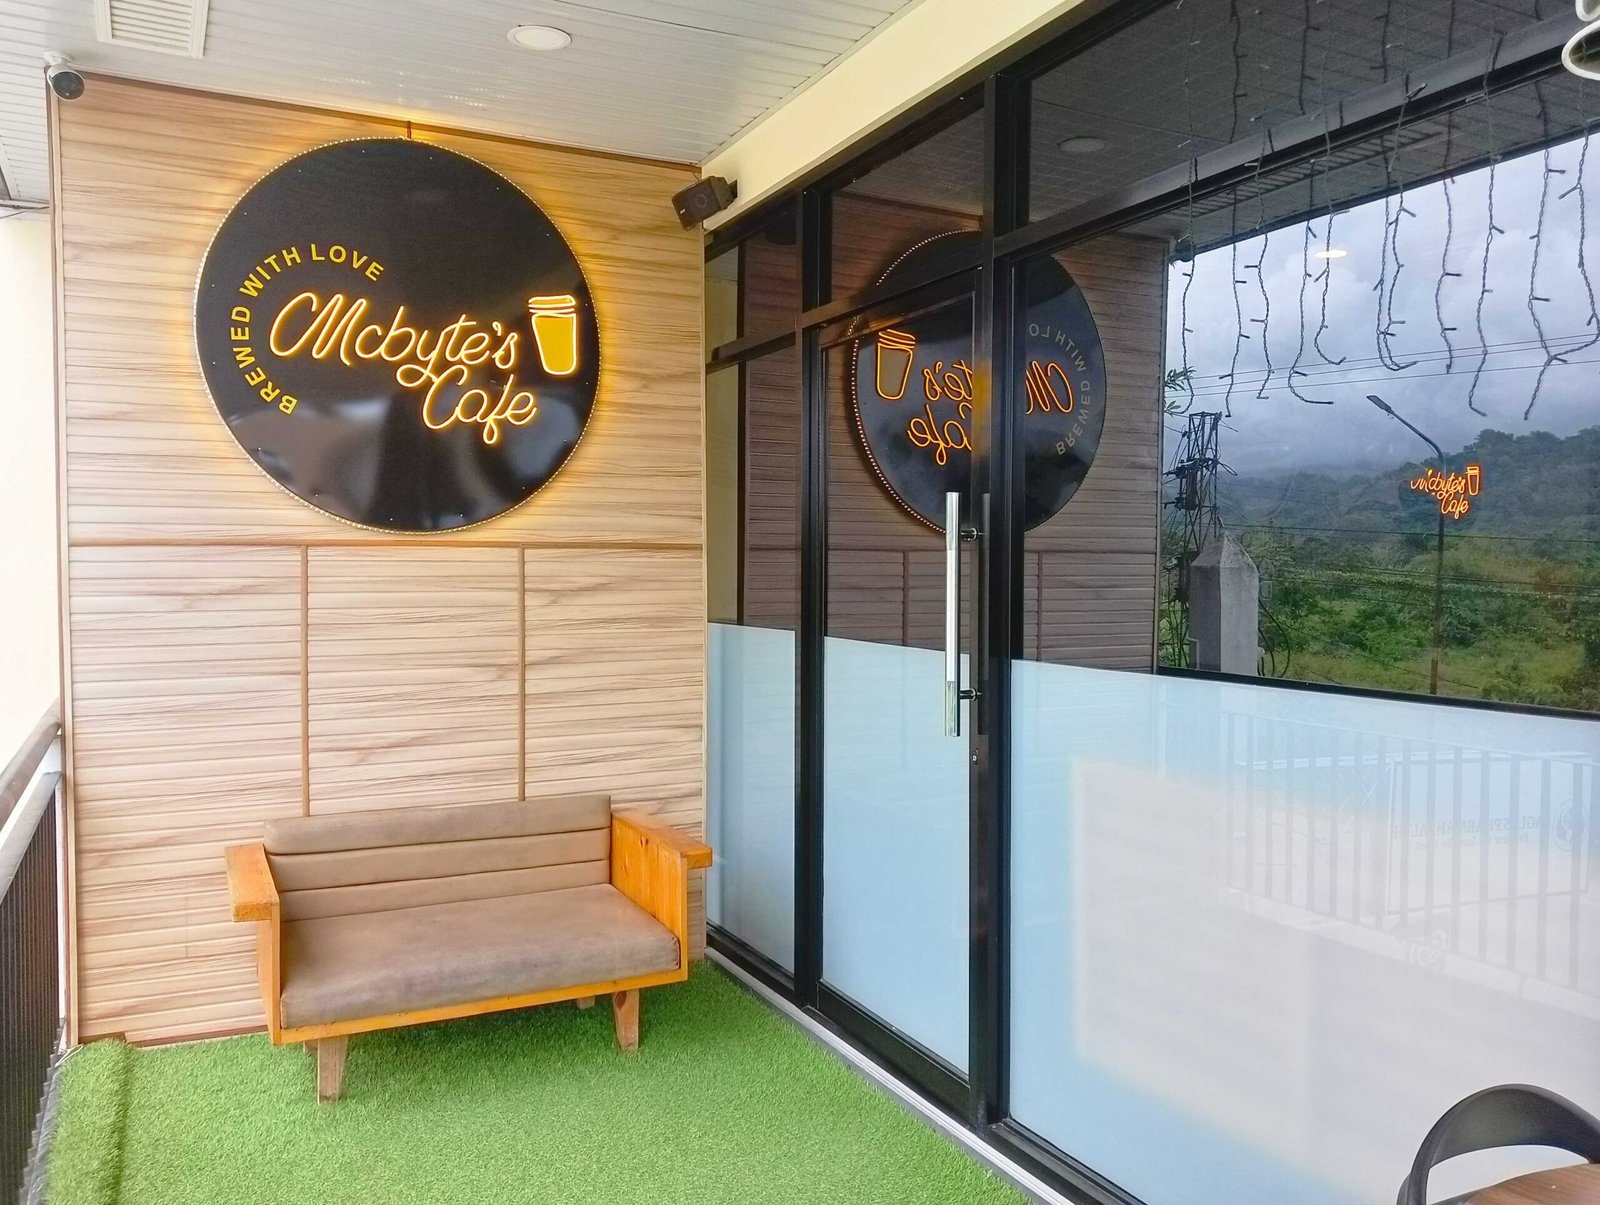 Mcbyte's Cafe - Satisfy Your Cravings Brewed With Love in Iligan City